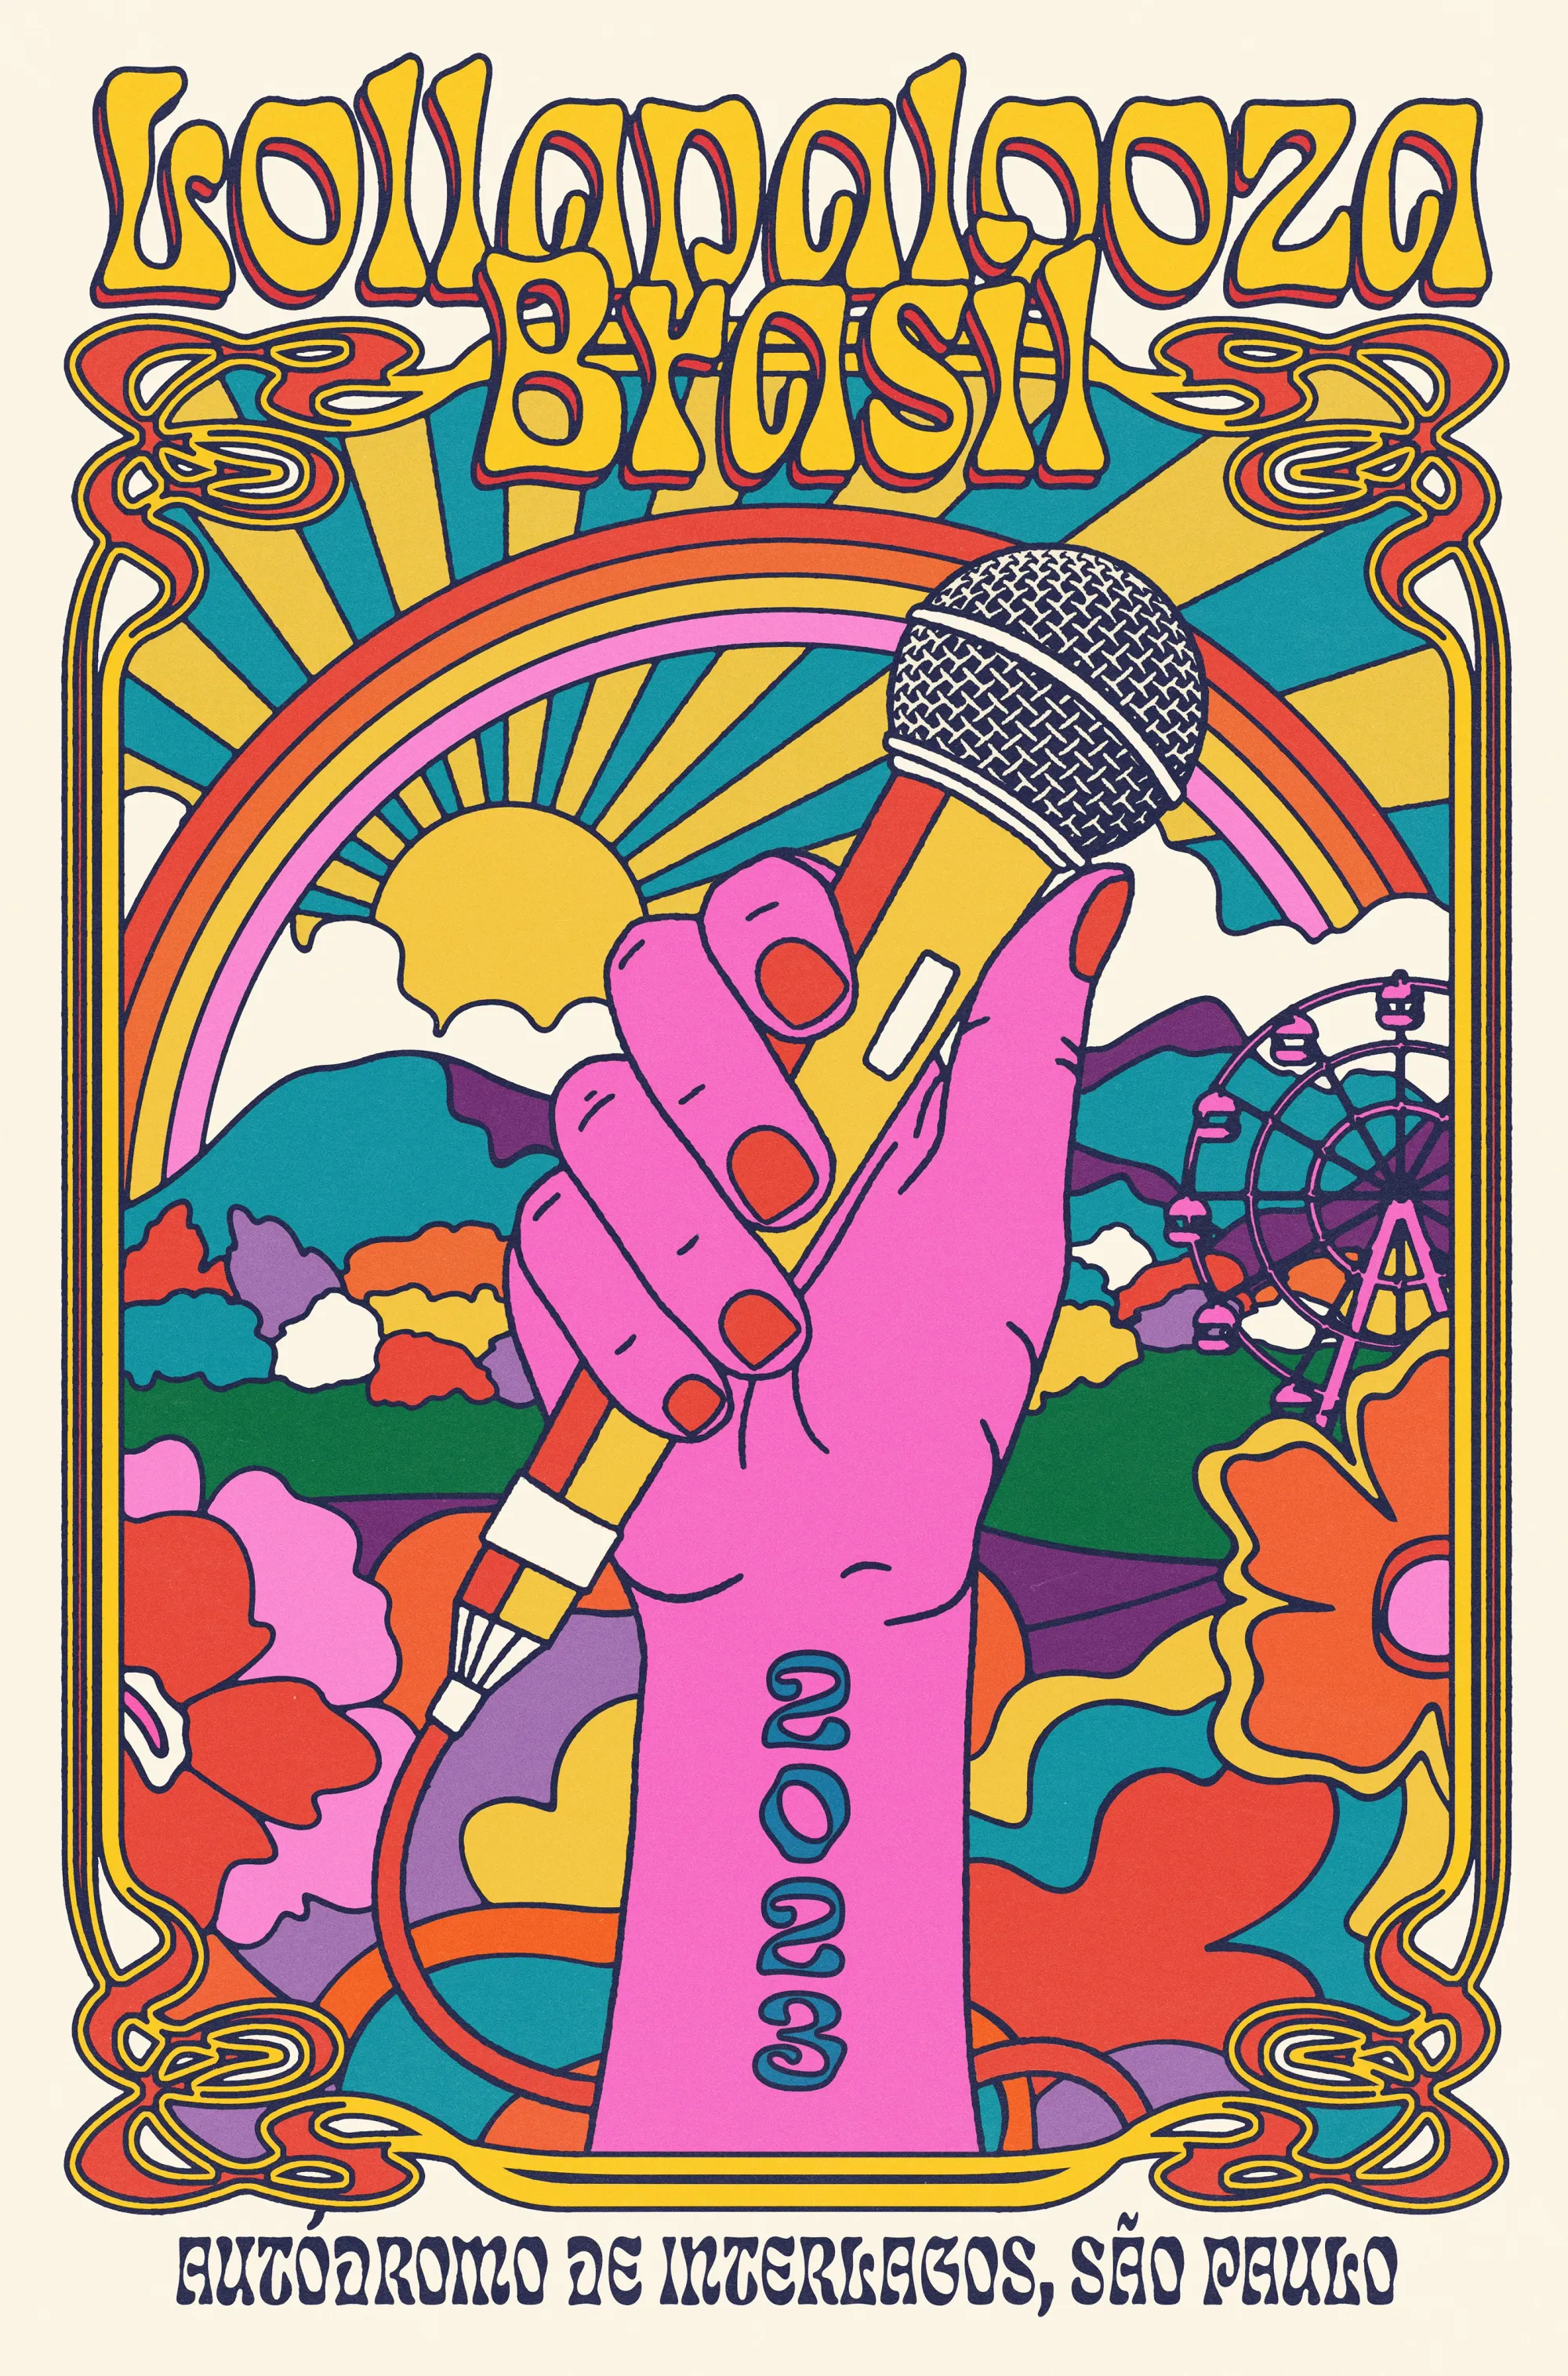 Around the world with music festival posters